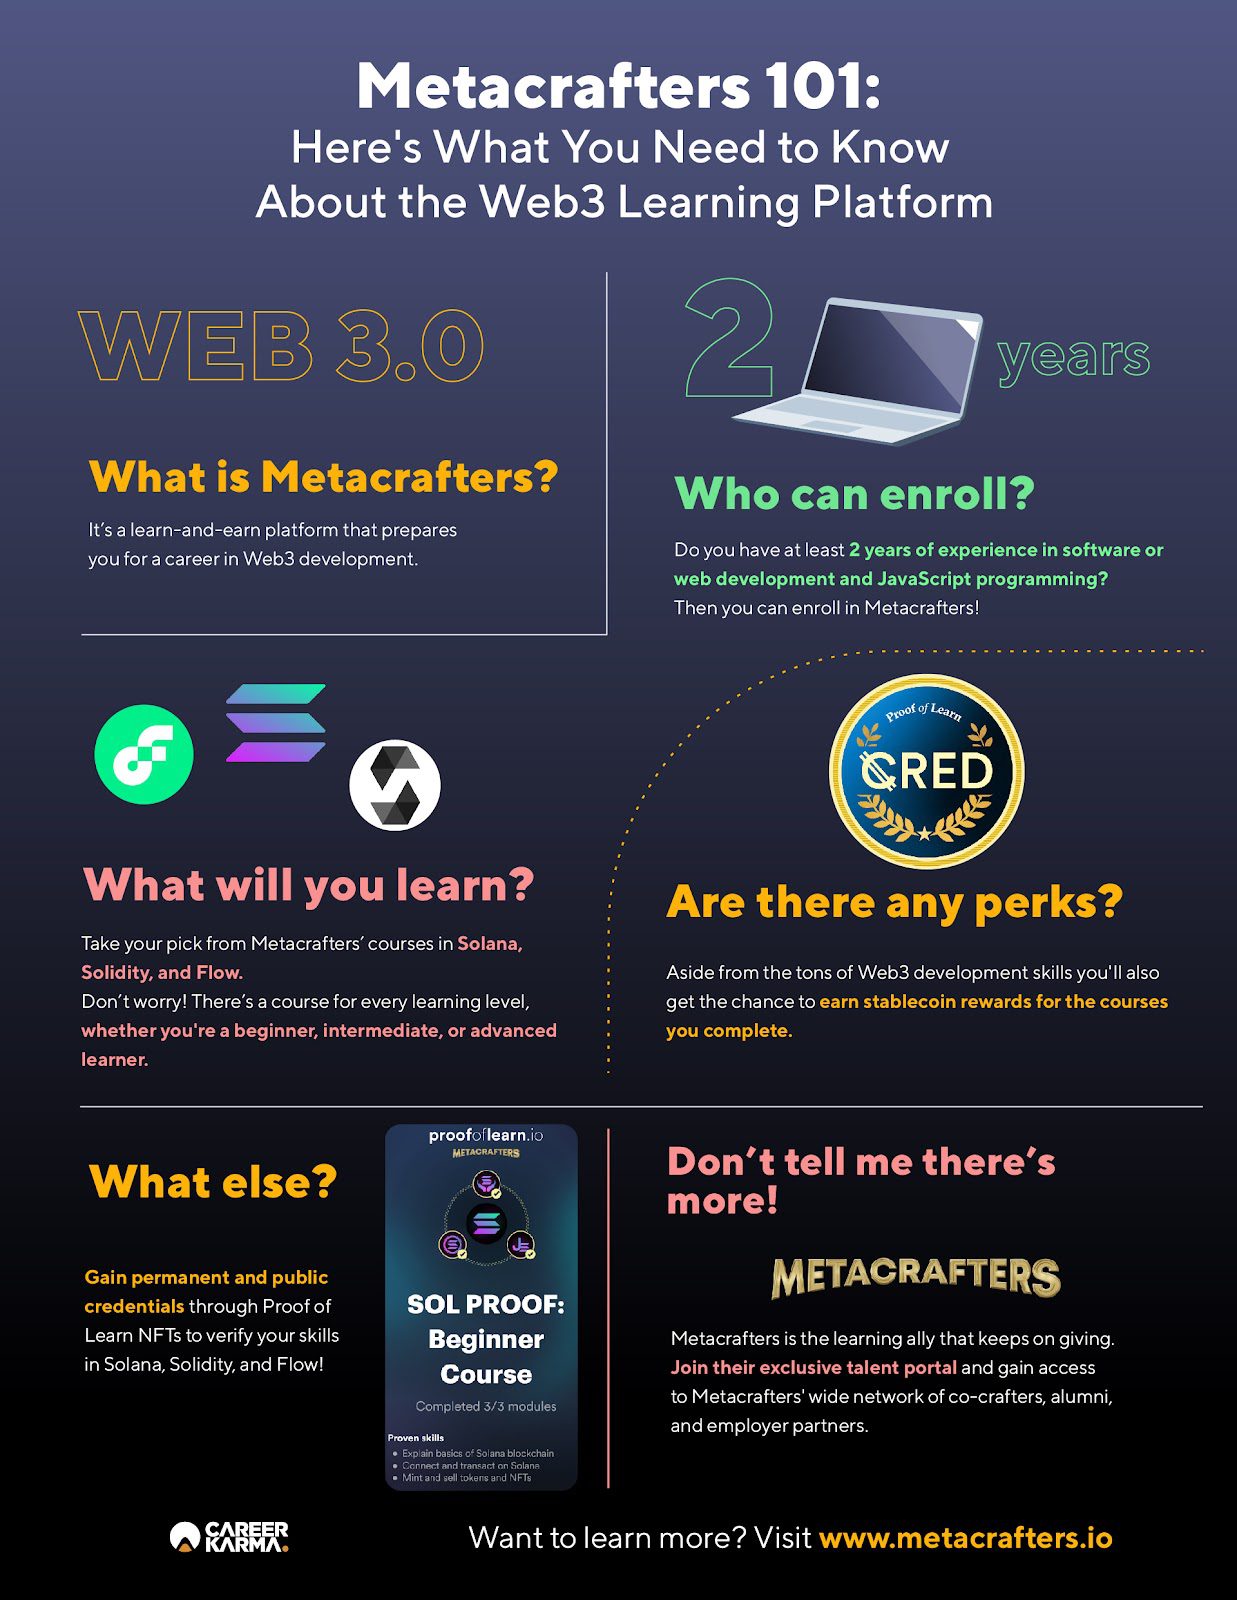 An infographic guide to Metacrafters 